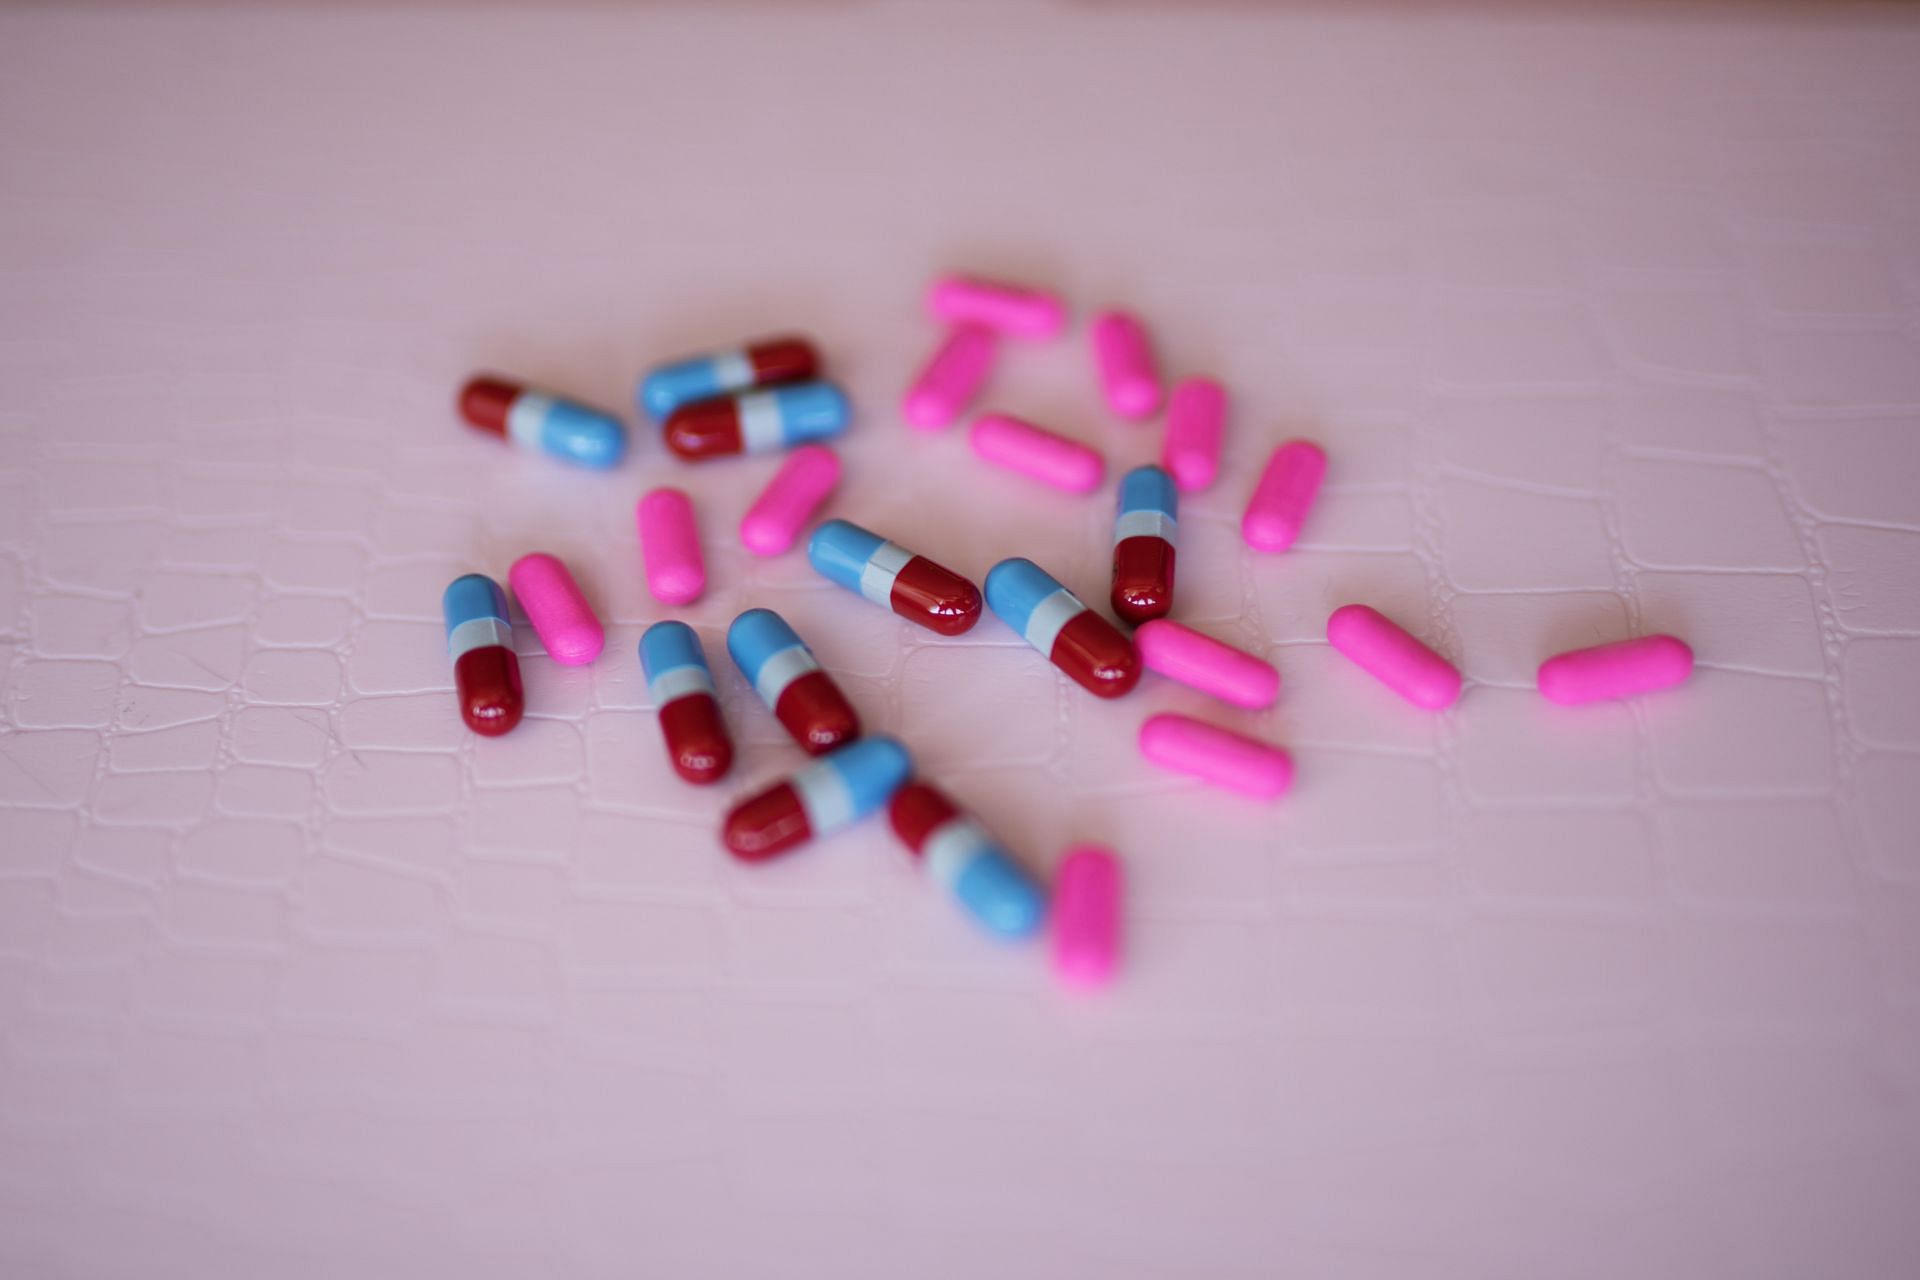 Aspirin has side effects that you should be aware of for your health. (Image via Unsplash/Thought Catalog)